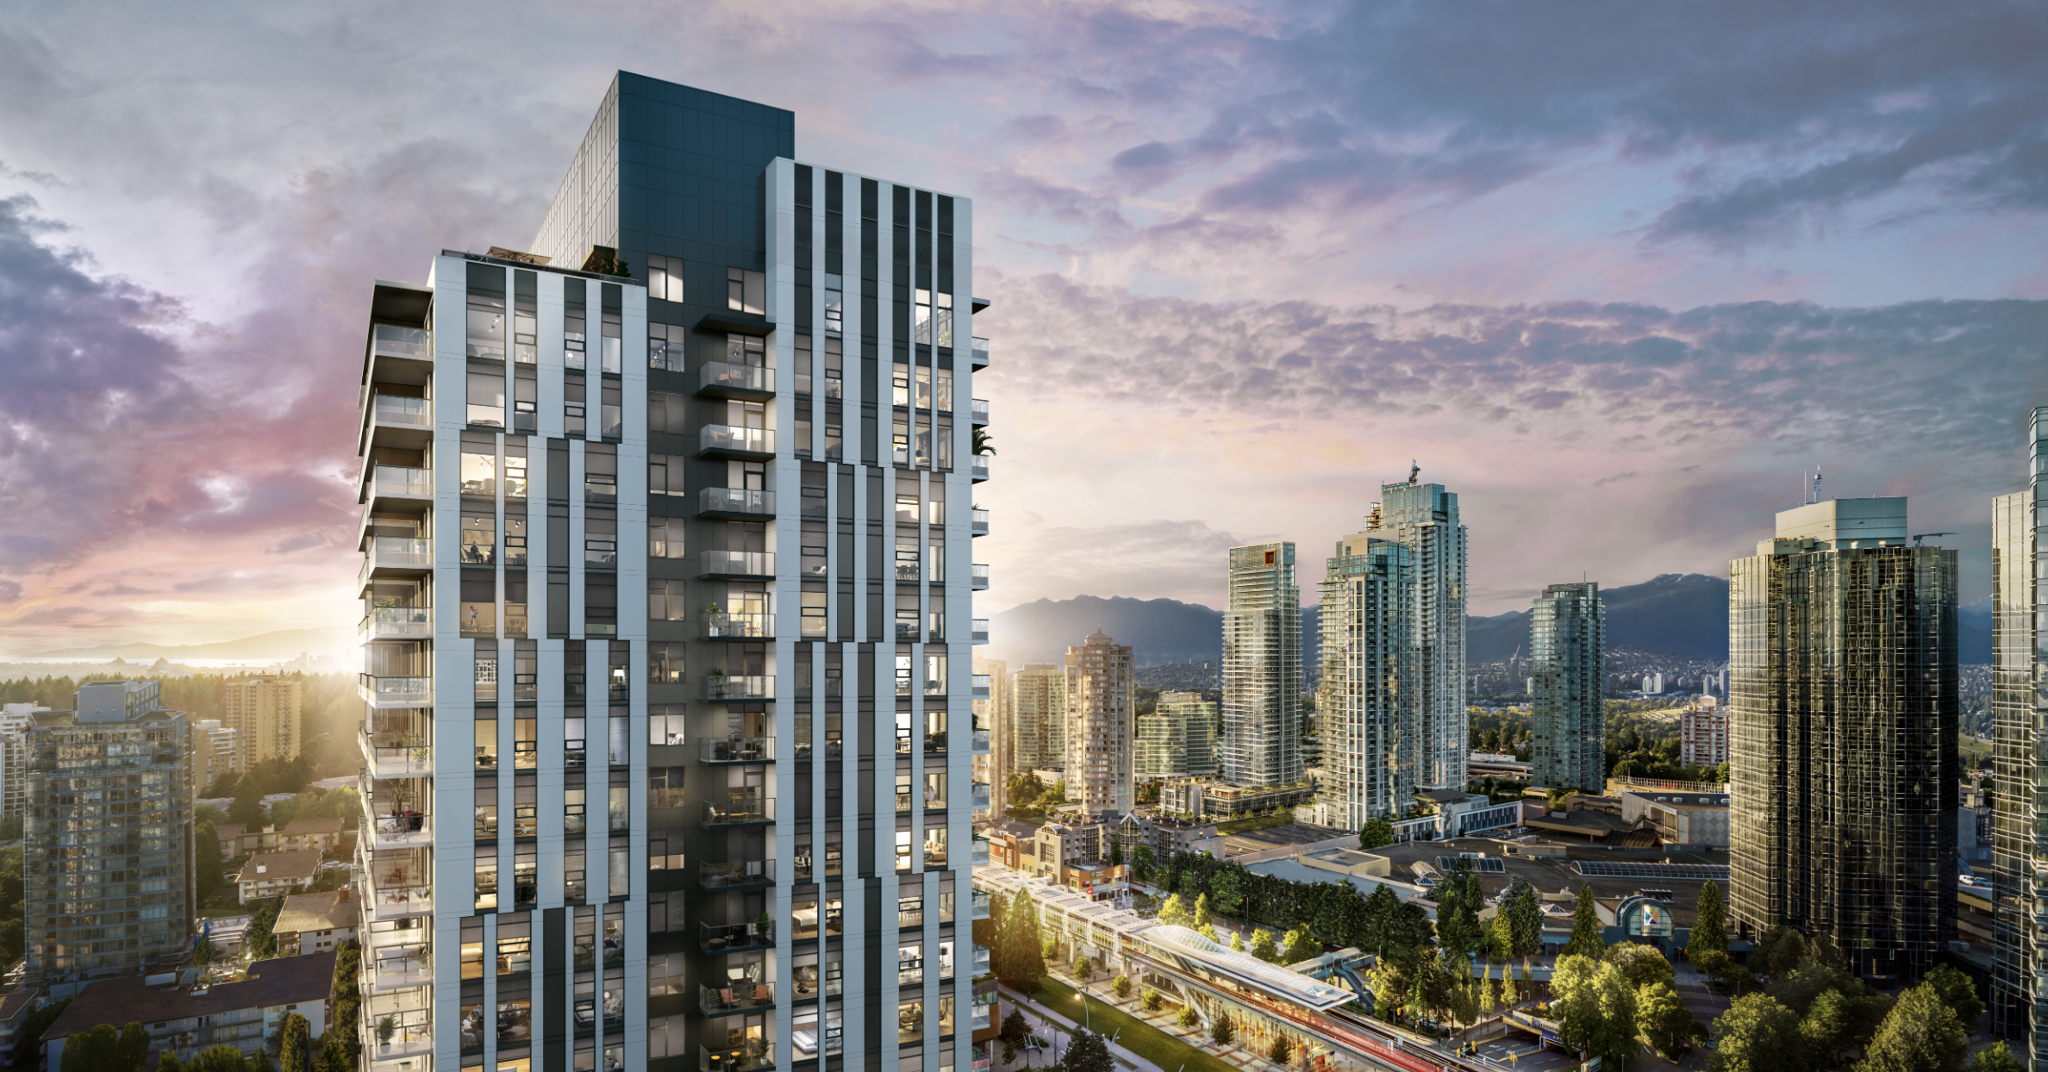 Main Photo: 20xx 6608 Sussex Avenue in Burnaby: Metrotown Condo for sale (Burnaby South) 